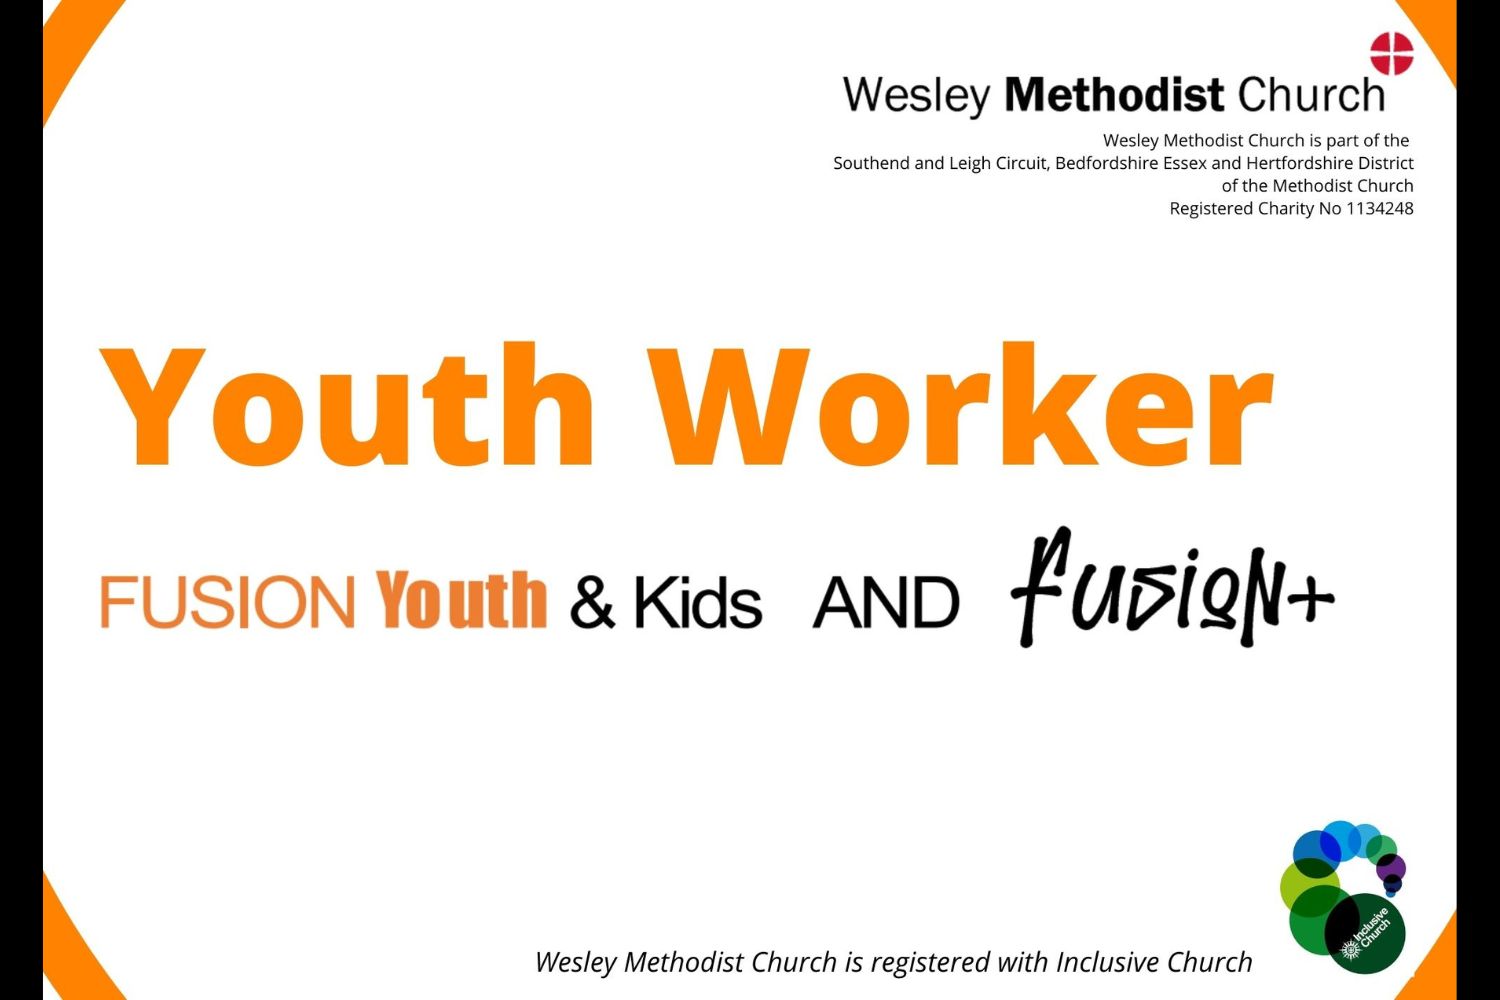 Jobs: Youth Worker at Wesley Methodist Church